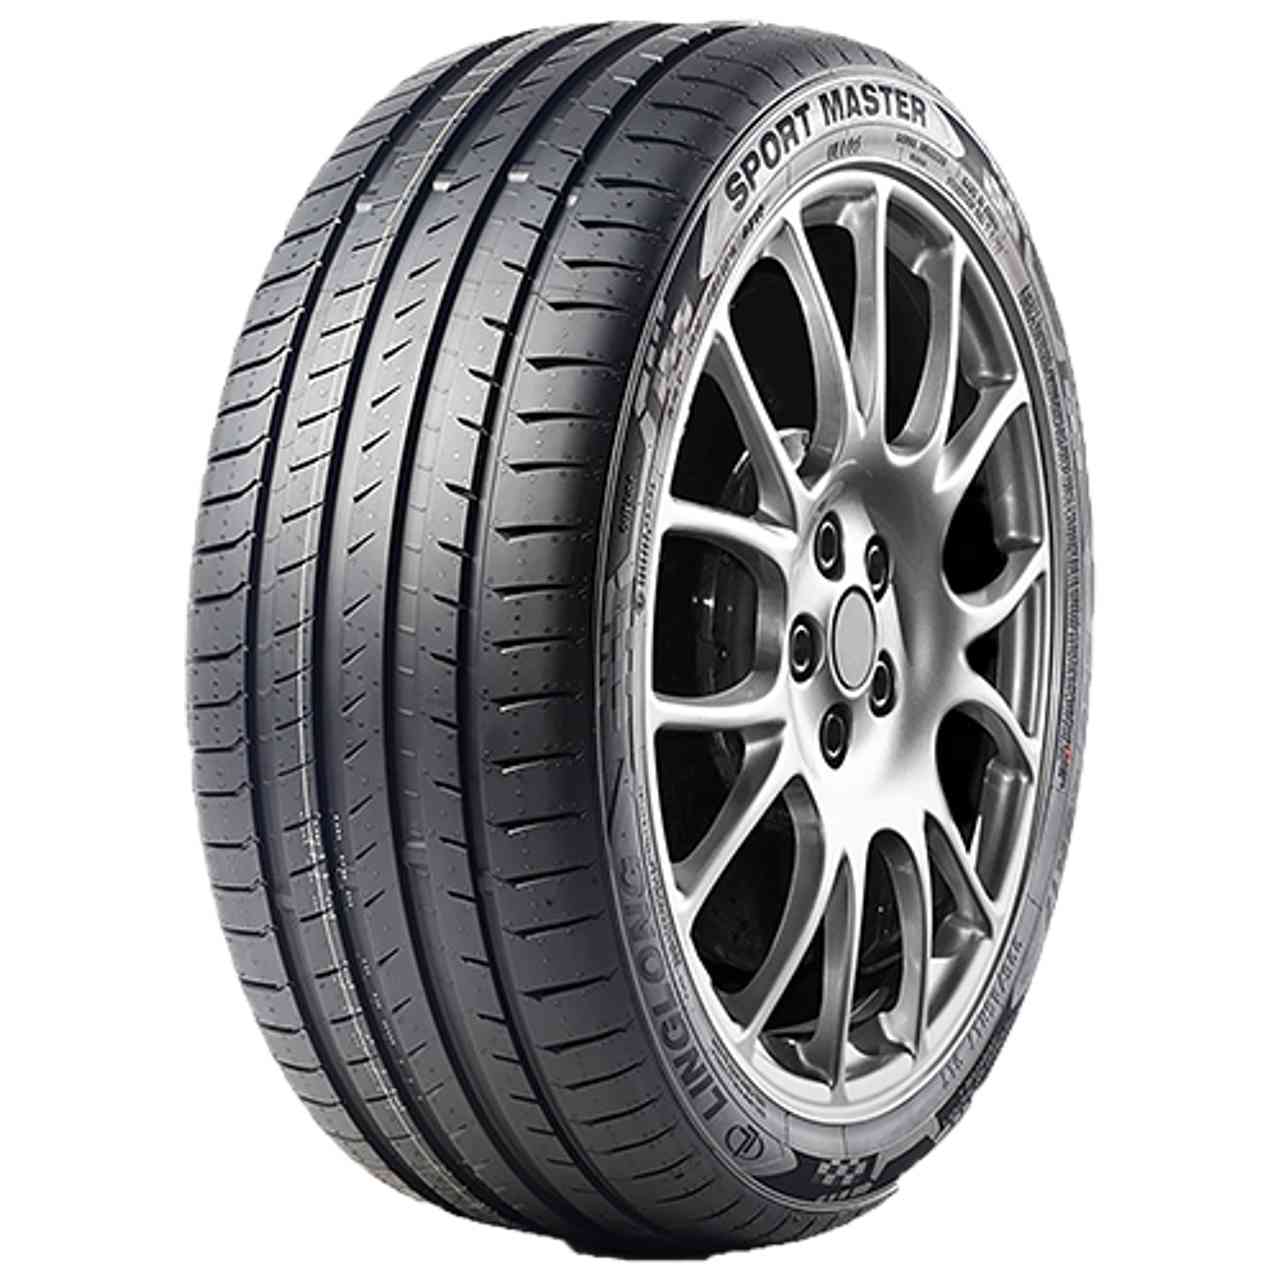 LINGLONG SPORT MASTER 225/55R17 101Y BSW